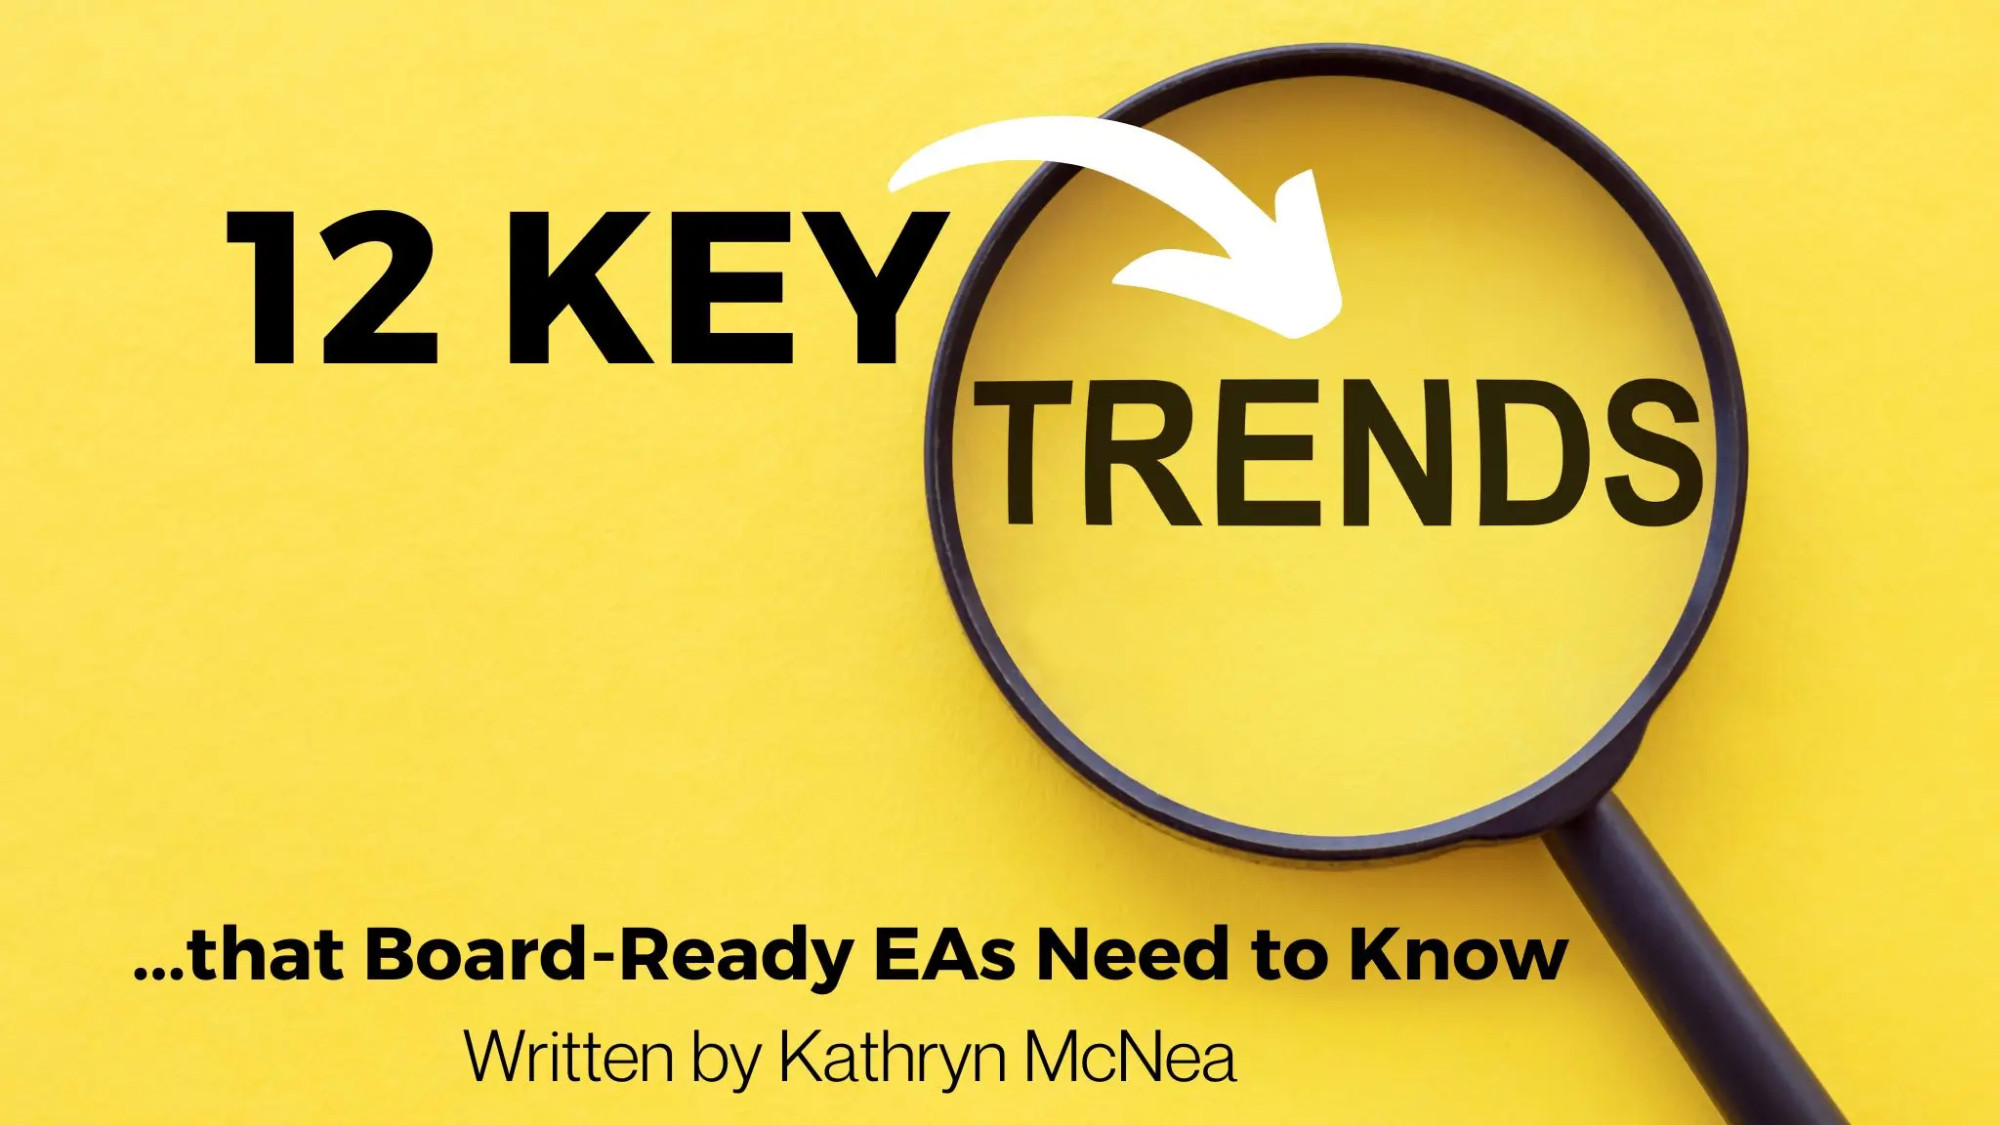 12 Key Trends that Board-Ready EAs Need to Know